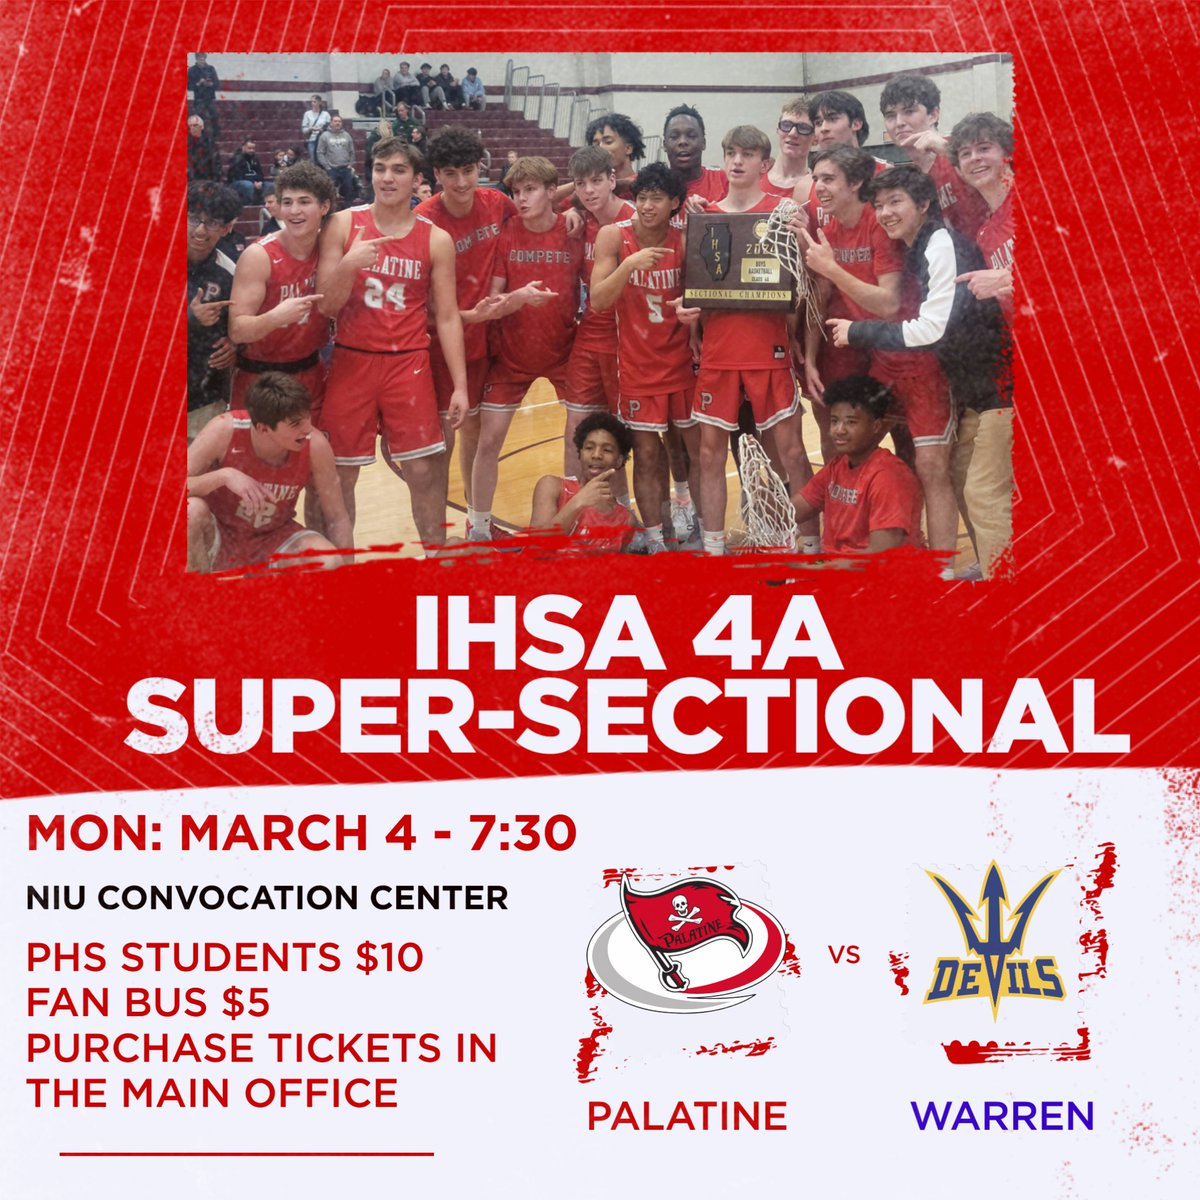 Congrats to the Boys Basketball team who beat Stevenson to advance to the IHSA 4A SUPERSECTIONAL Let's pack the place! PHS students can purchase tickets in the Main Office $10 Fan Bus $5 GENERAL ADMISSION tinyurl.com/3v6n6bzc Promocode: 4AHOME